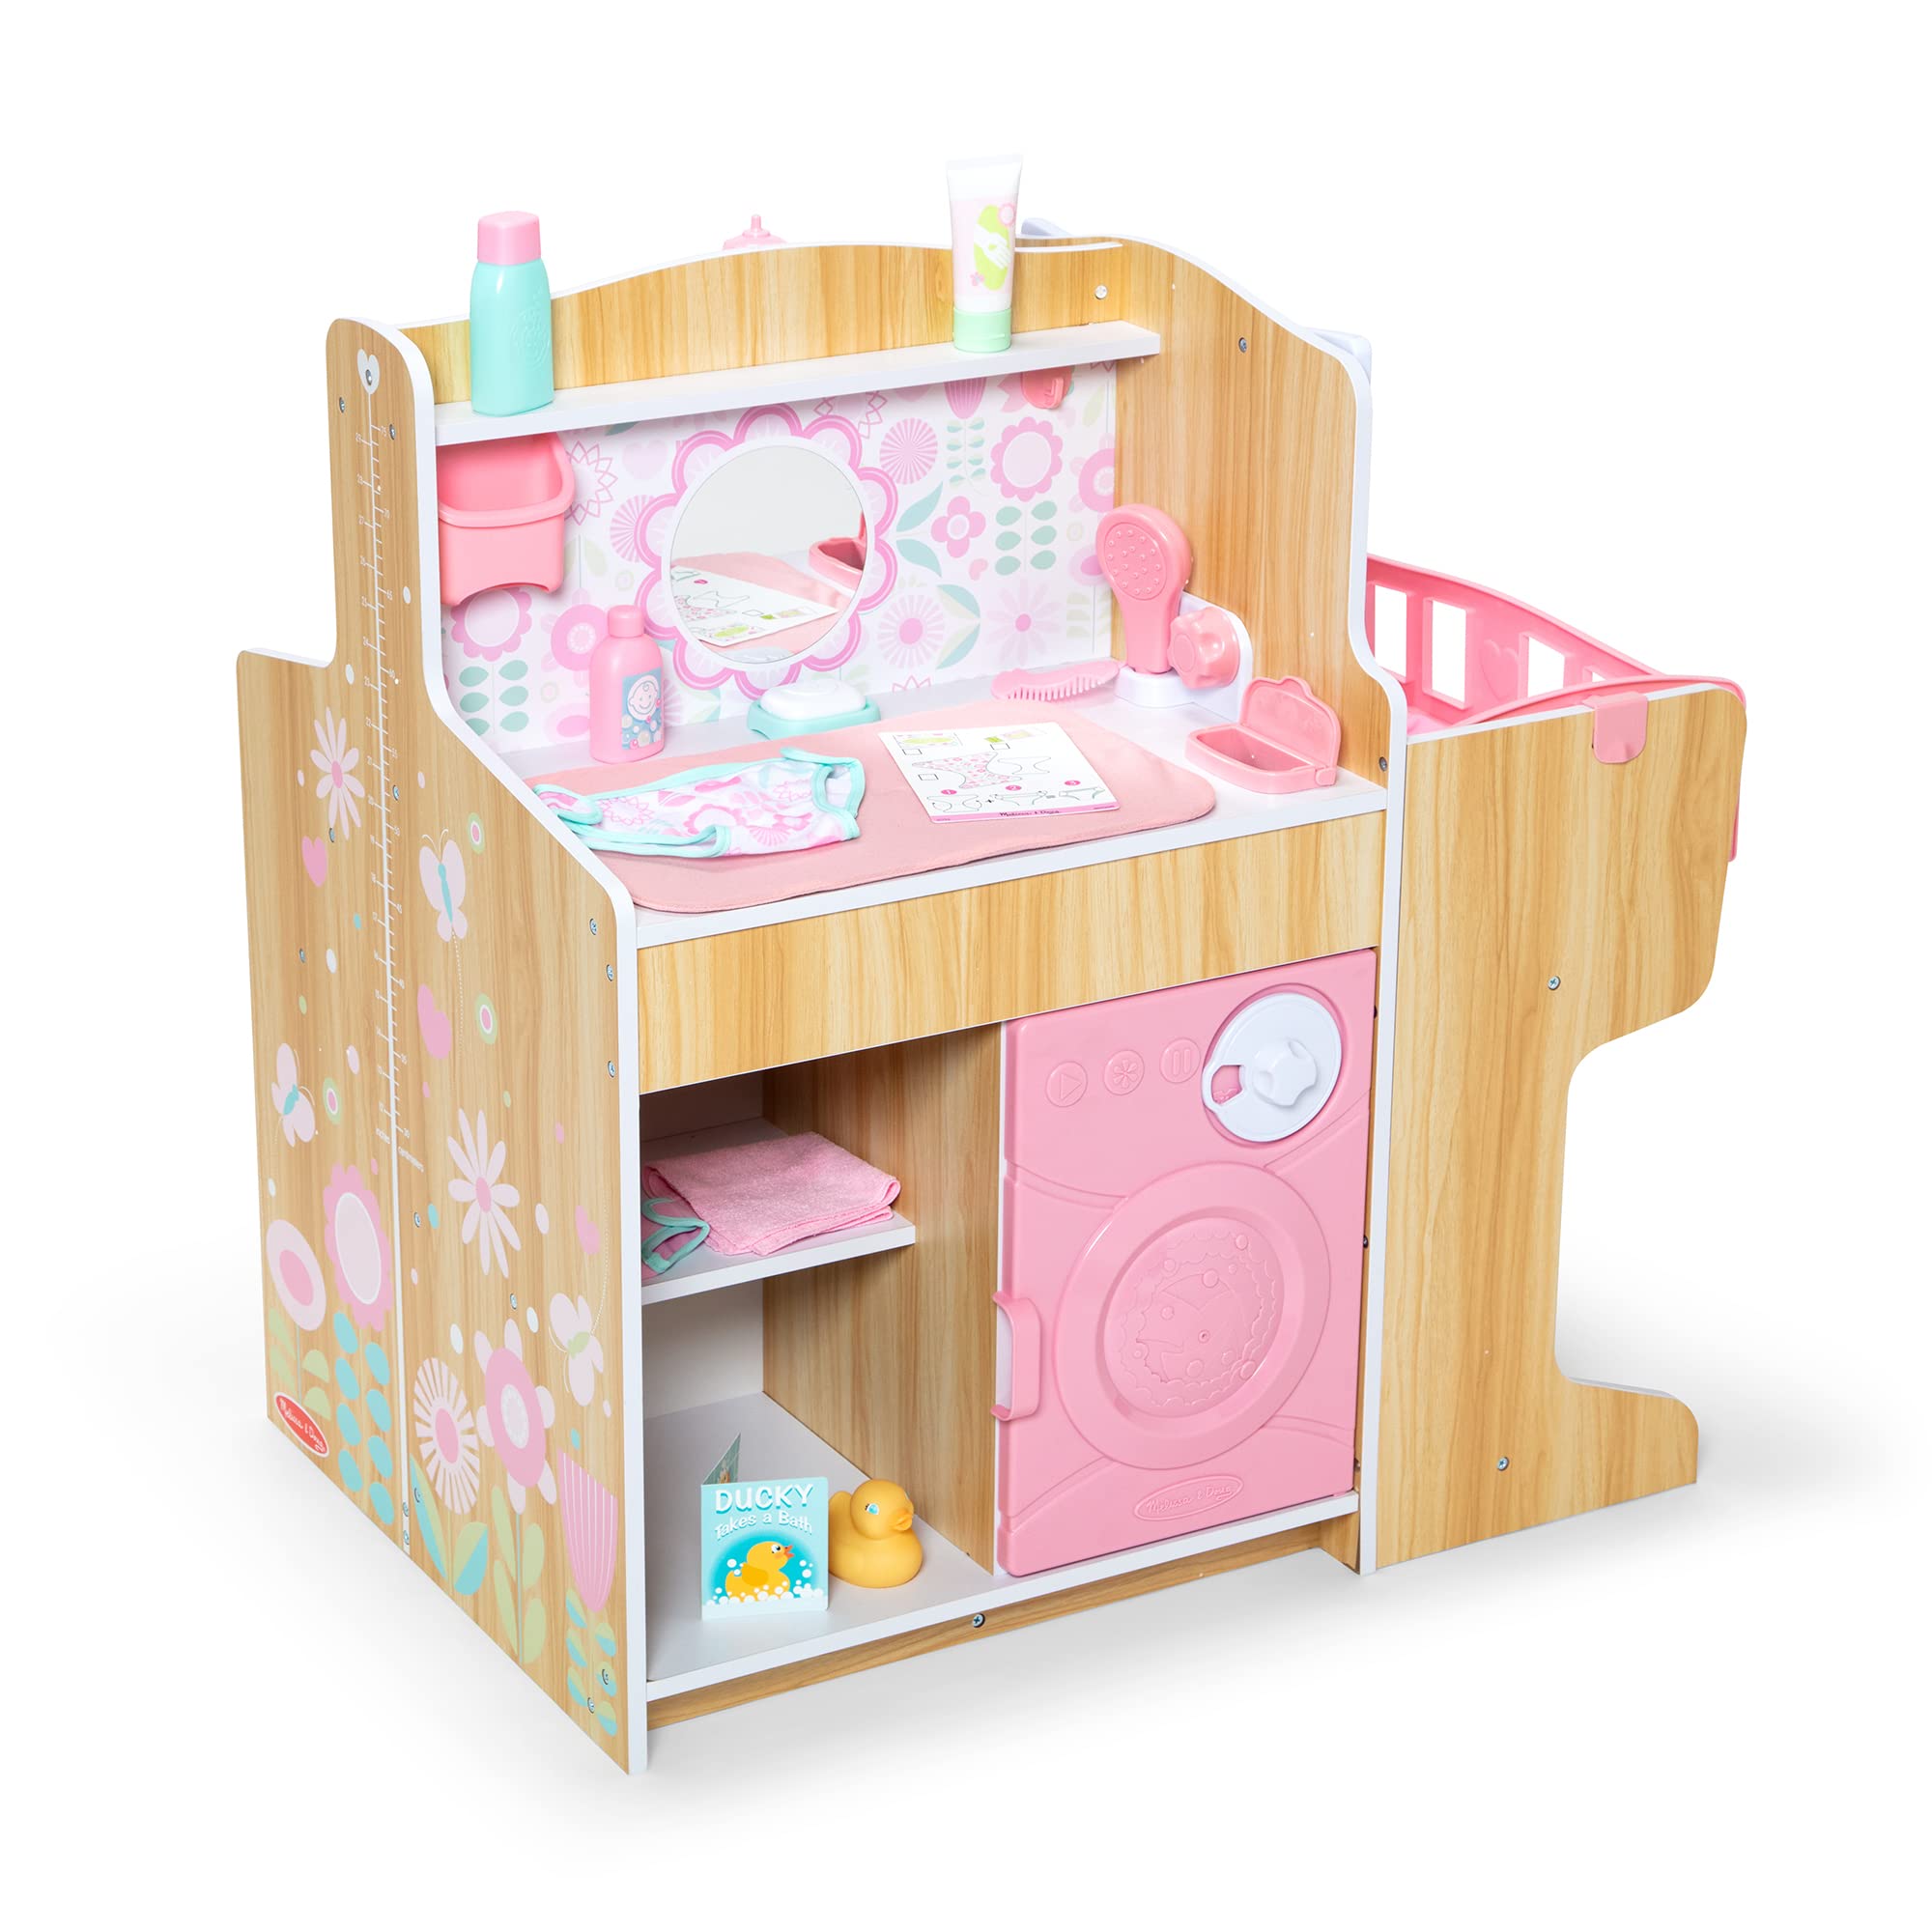 $99.99 (Prime Members): Melissa & Doug Baby Care Center and Accessory Sets